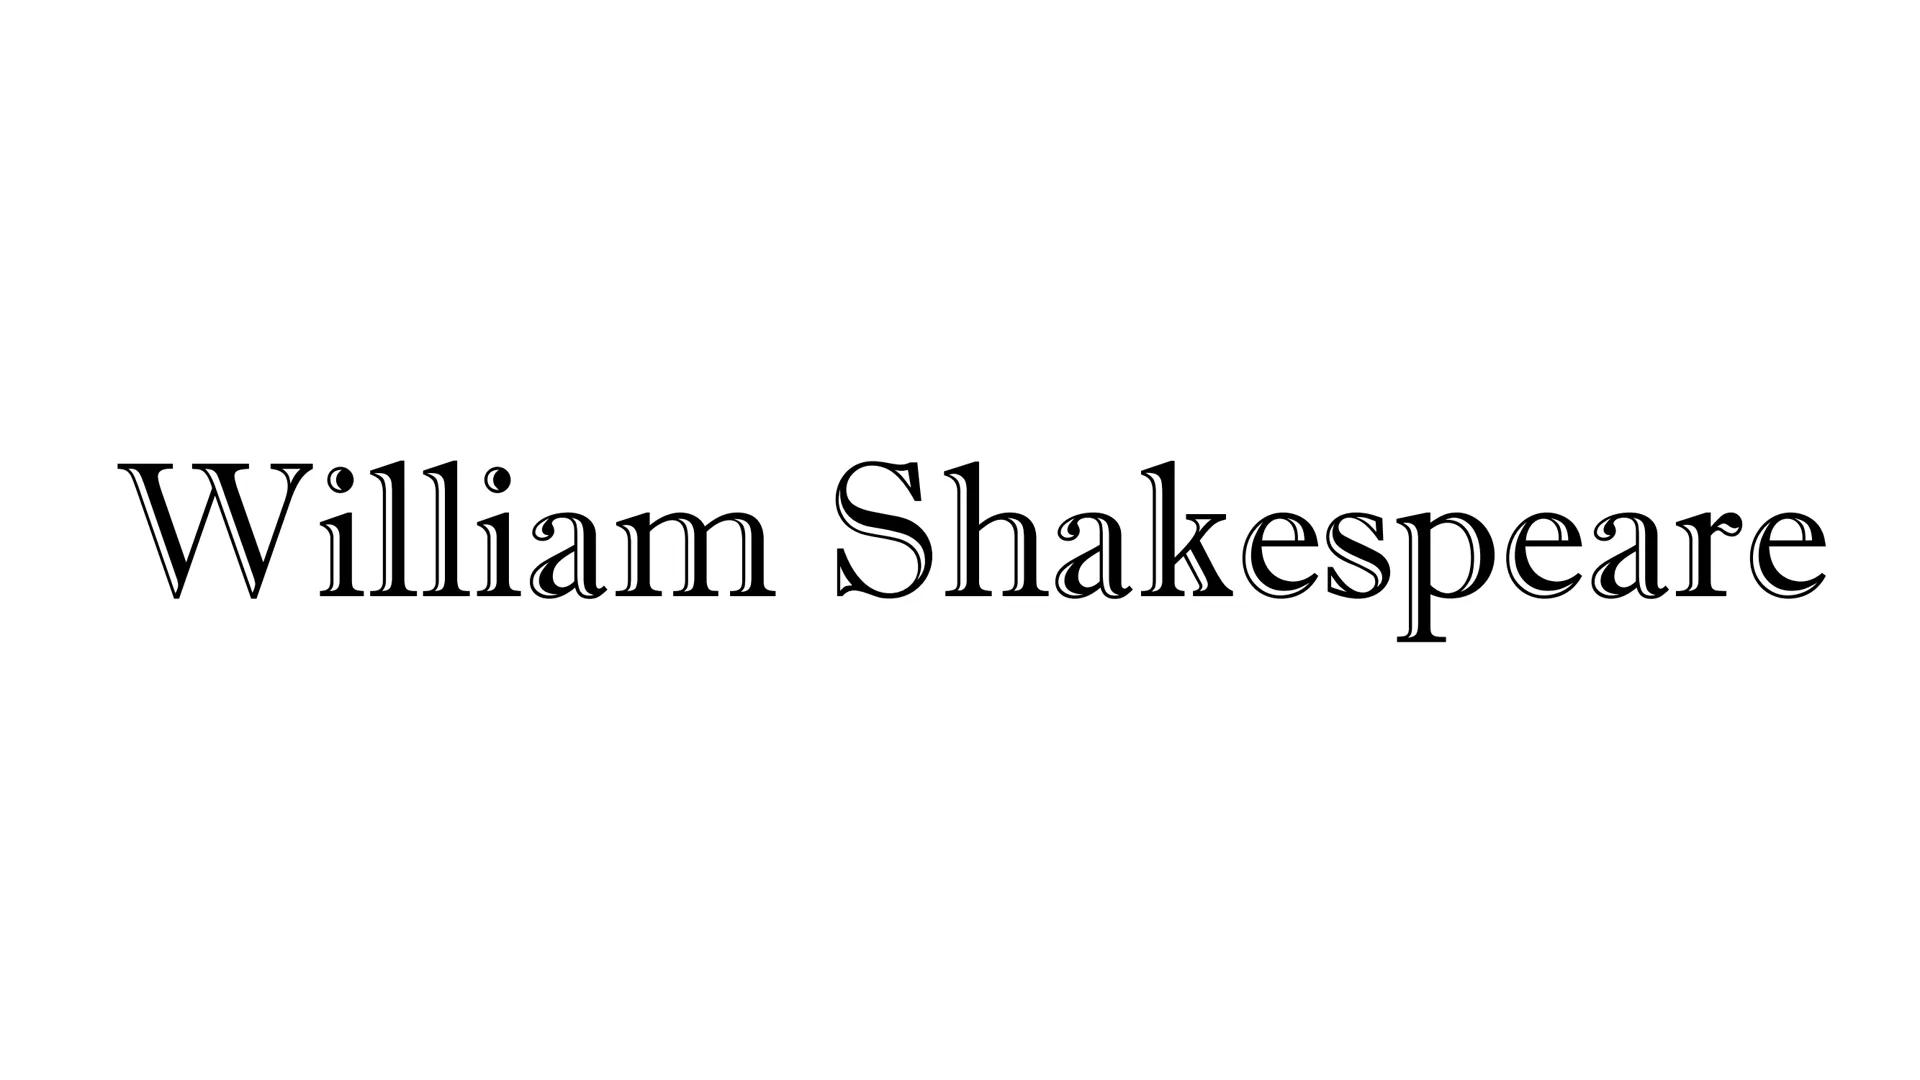 William Shakespeare William Shakespeare
Facts about William Shakespeare:
regarded as one of the greatest playwrights in history and his work